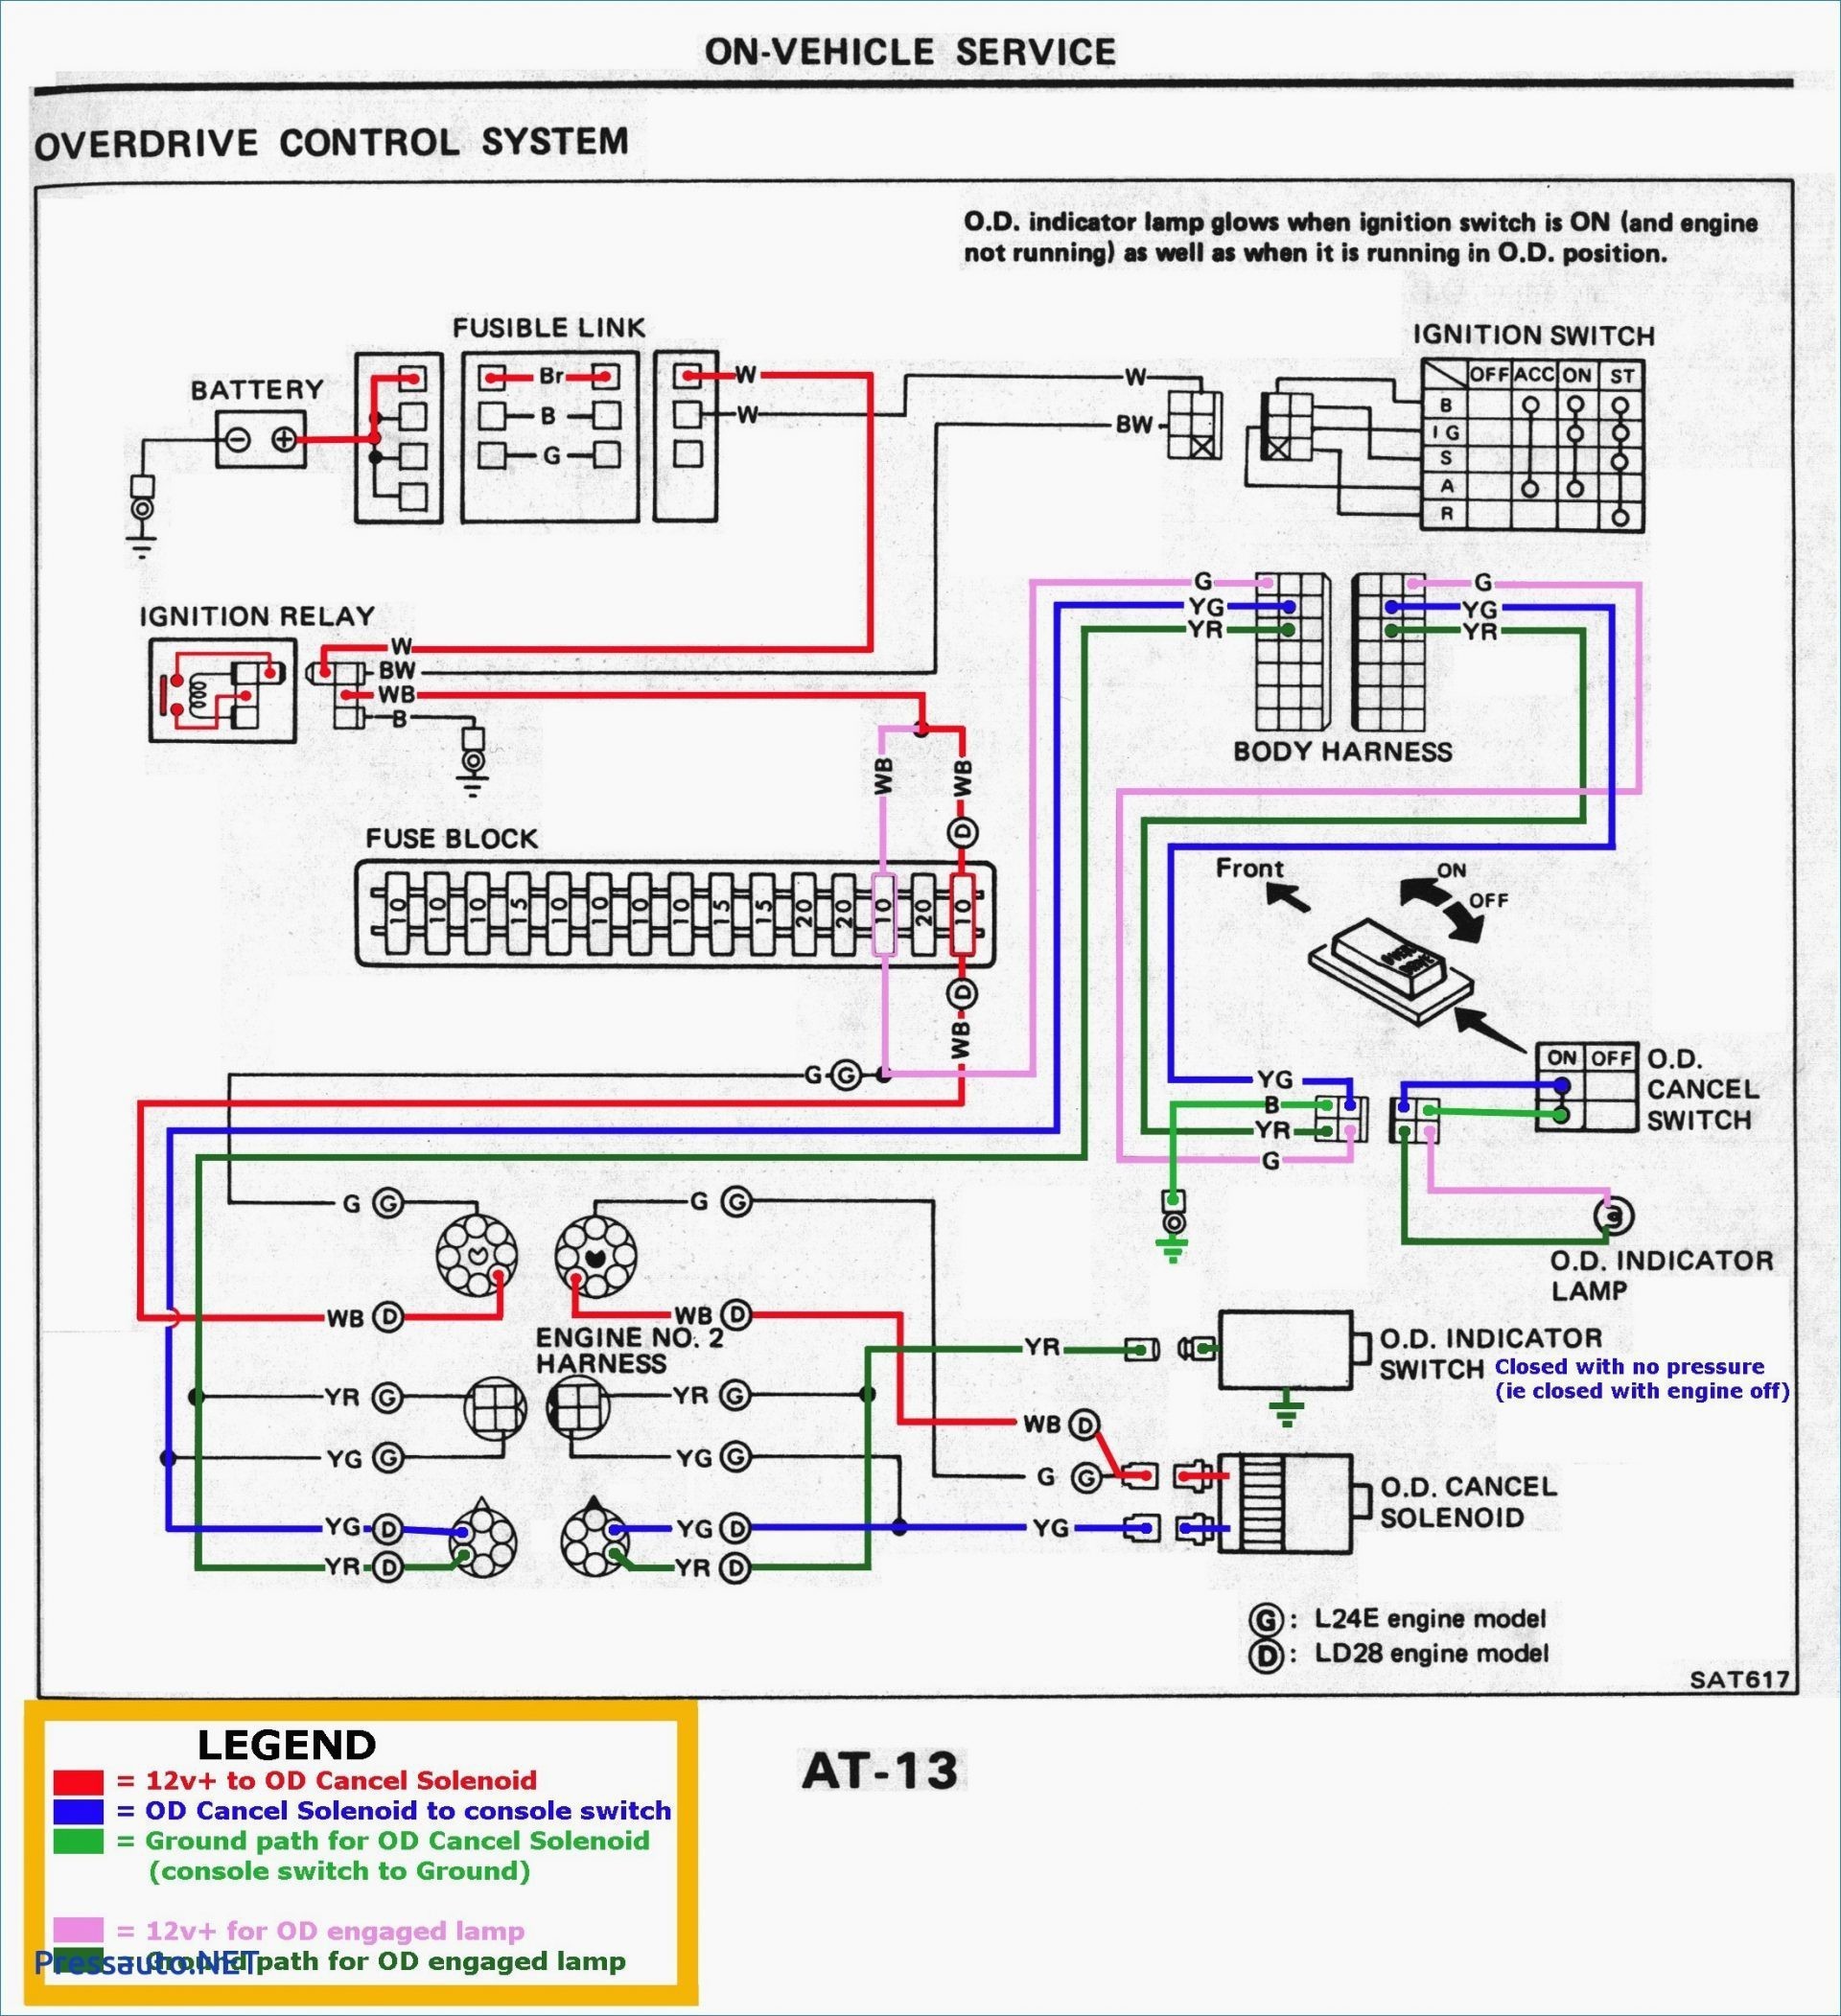 Electrical Wiring Diagram House Simple Basic House Wiring Diagram Best House Electrical Wiring Diagram